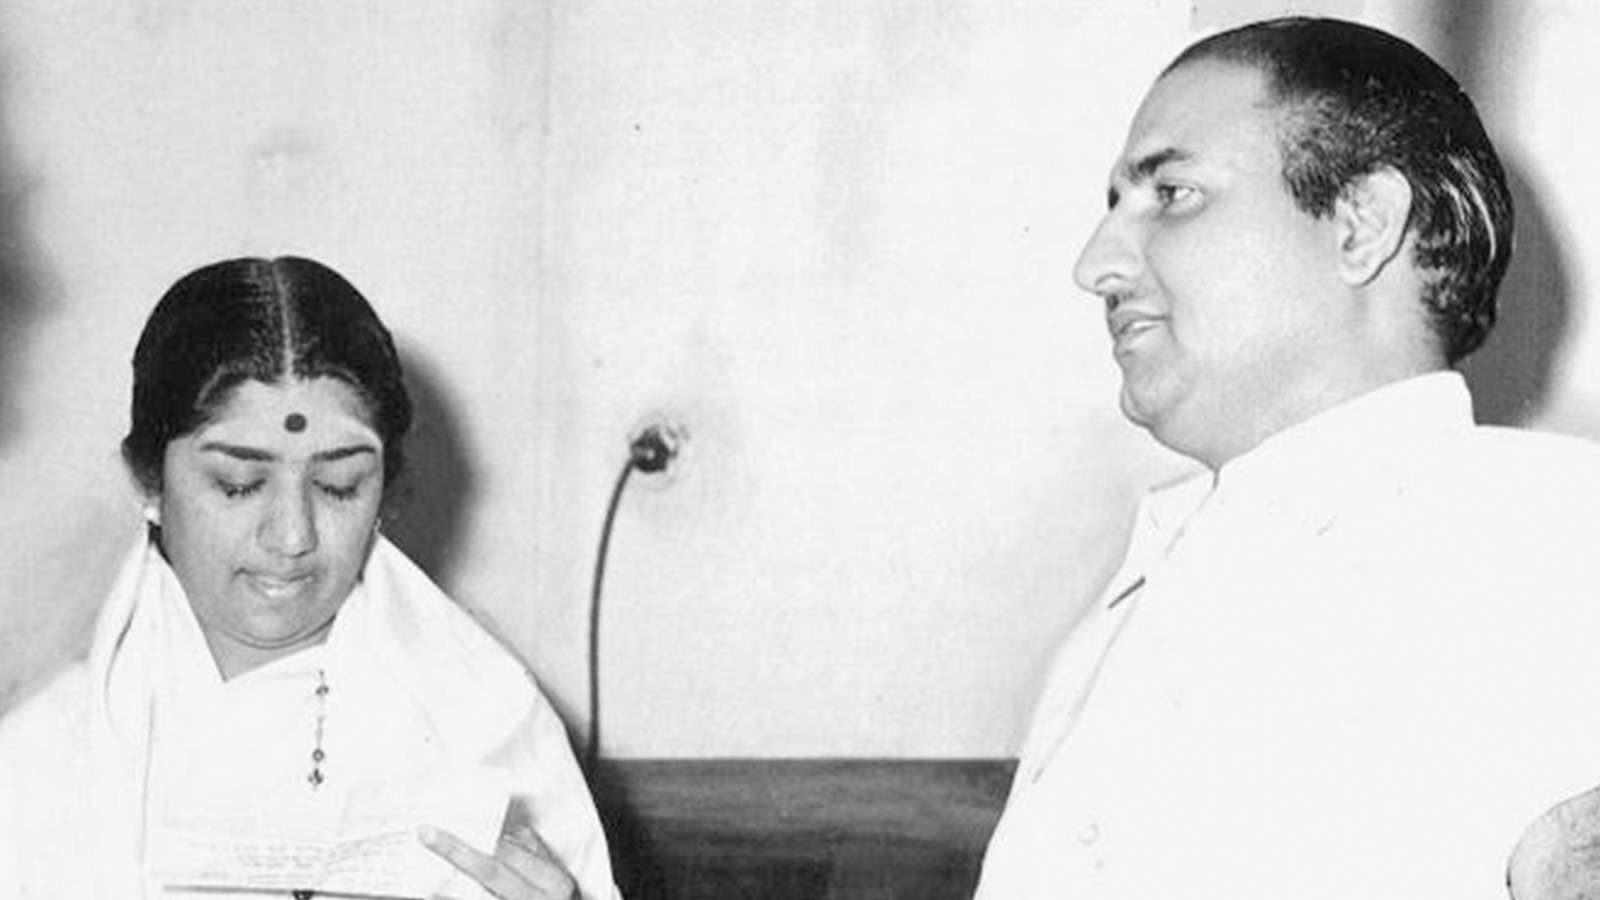 Mohammed Rafi Made Lata Mangeshkar Laugh Between Live Performance On Stage